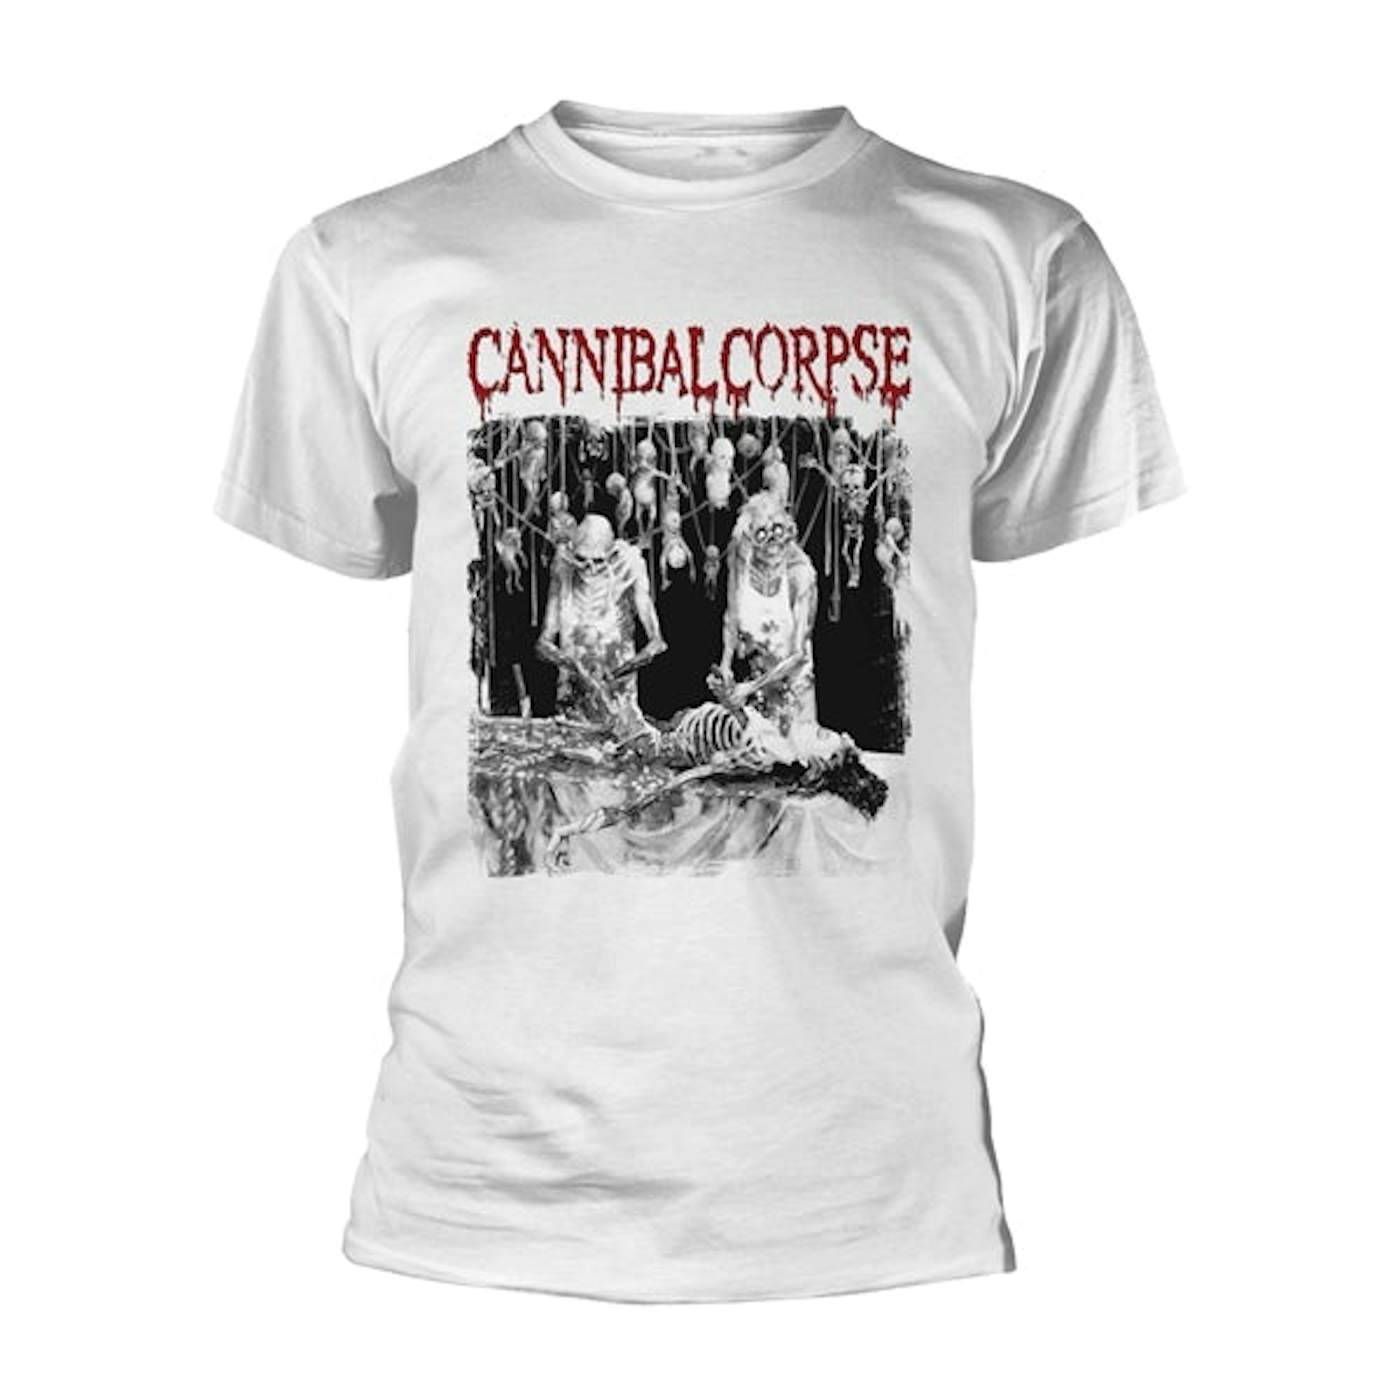 Cannibal Corpse T-Shirt - Butchered At Birth (White)